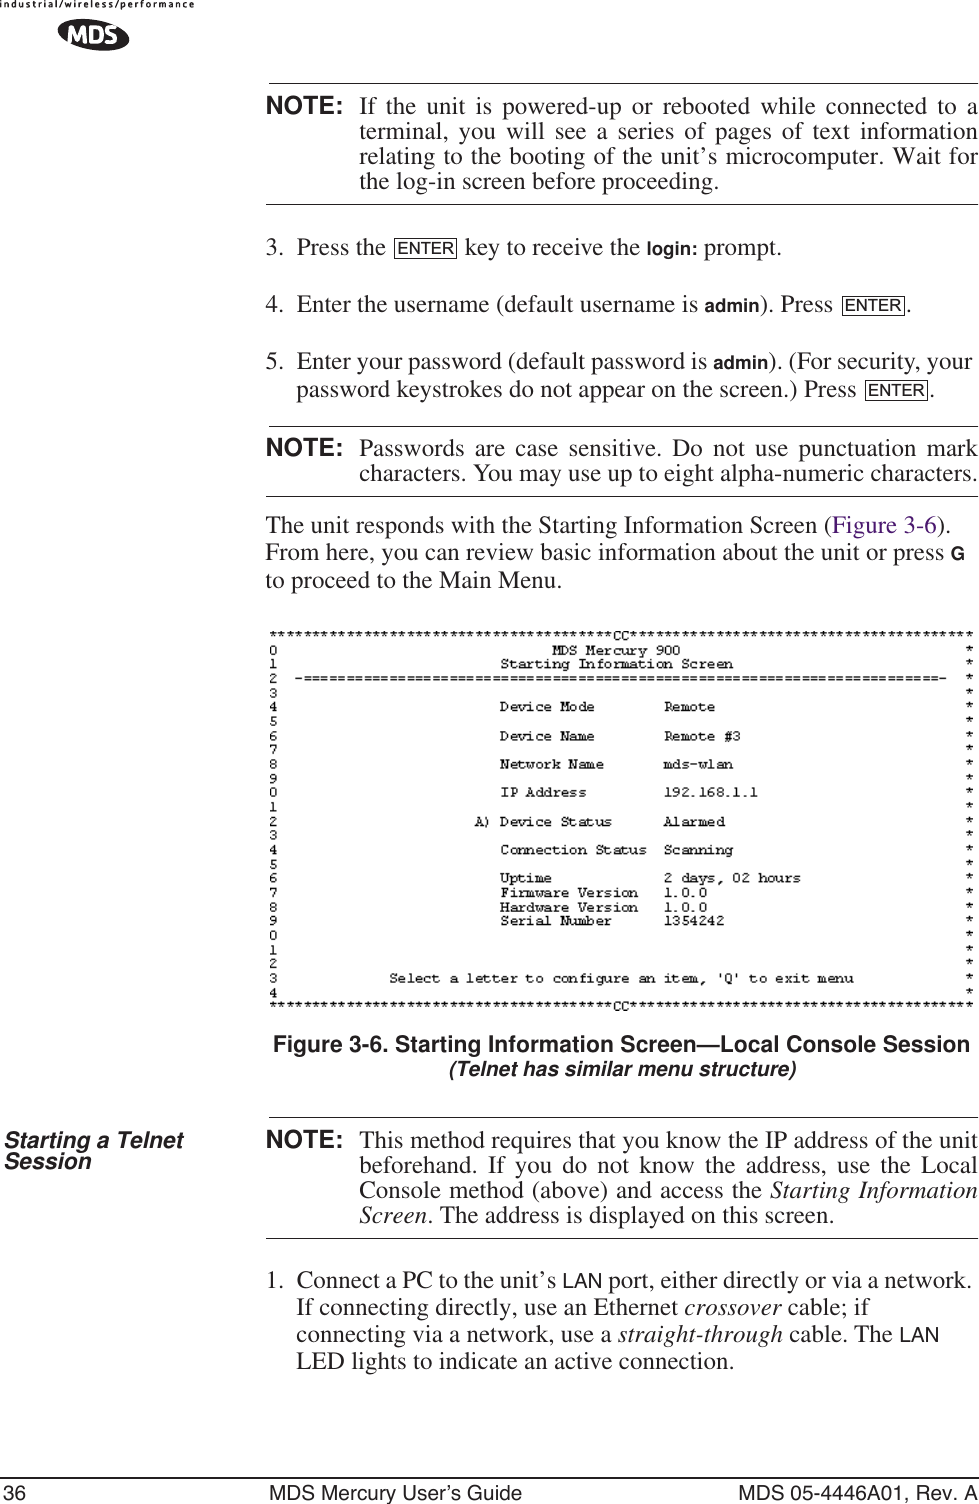 36 MDS Mercury User’s Guide MDS 05-4446A01, Rev. ANOTE: If the unit is powered-up or rebooted while connected to aterminal, you will see a series of pages of text informationrelating to the booting of the unit’s microcomputer. Wait forthe log-in screen before proceeding.3. Press the   key to receive the login: prompt. 4. Enter the username (default username is admin). Press  .5. Enter your password (default password is admin). (For security, your password keystrokes do not appear on the screen.) Press  .NOTE: Passwords are case sensitive. Do not use punctuation markcharacters. You may use up to eight alpha-numeric characters.The unit responds with the Starting Information Screen (Figure 3-6). From here, you can review basic information about the unit or press G to proceed to the Main Menu.Invisible place holderFigure 3-6. Starting Information Screen—Local Console Session(Telnet has similar menu structure)Starting a Telnet Session NOTE: This method requires that you know the IP address of the unitbeforehand. If you do not know the address, use the LocalConsole method (above) and access the Starting InformationScreen. The address is displayed on this screen.1. Connect a PC to the unit’s LAN port, either directly or via a network. If connecting directly, use an Ethernet crossover cable; if connecting via a network, use a straight-through cable. The LAN LED lights to indicate an active connection.ENTERENTERENTER